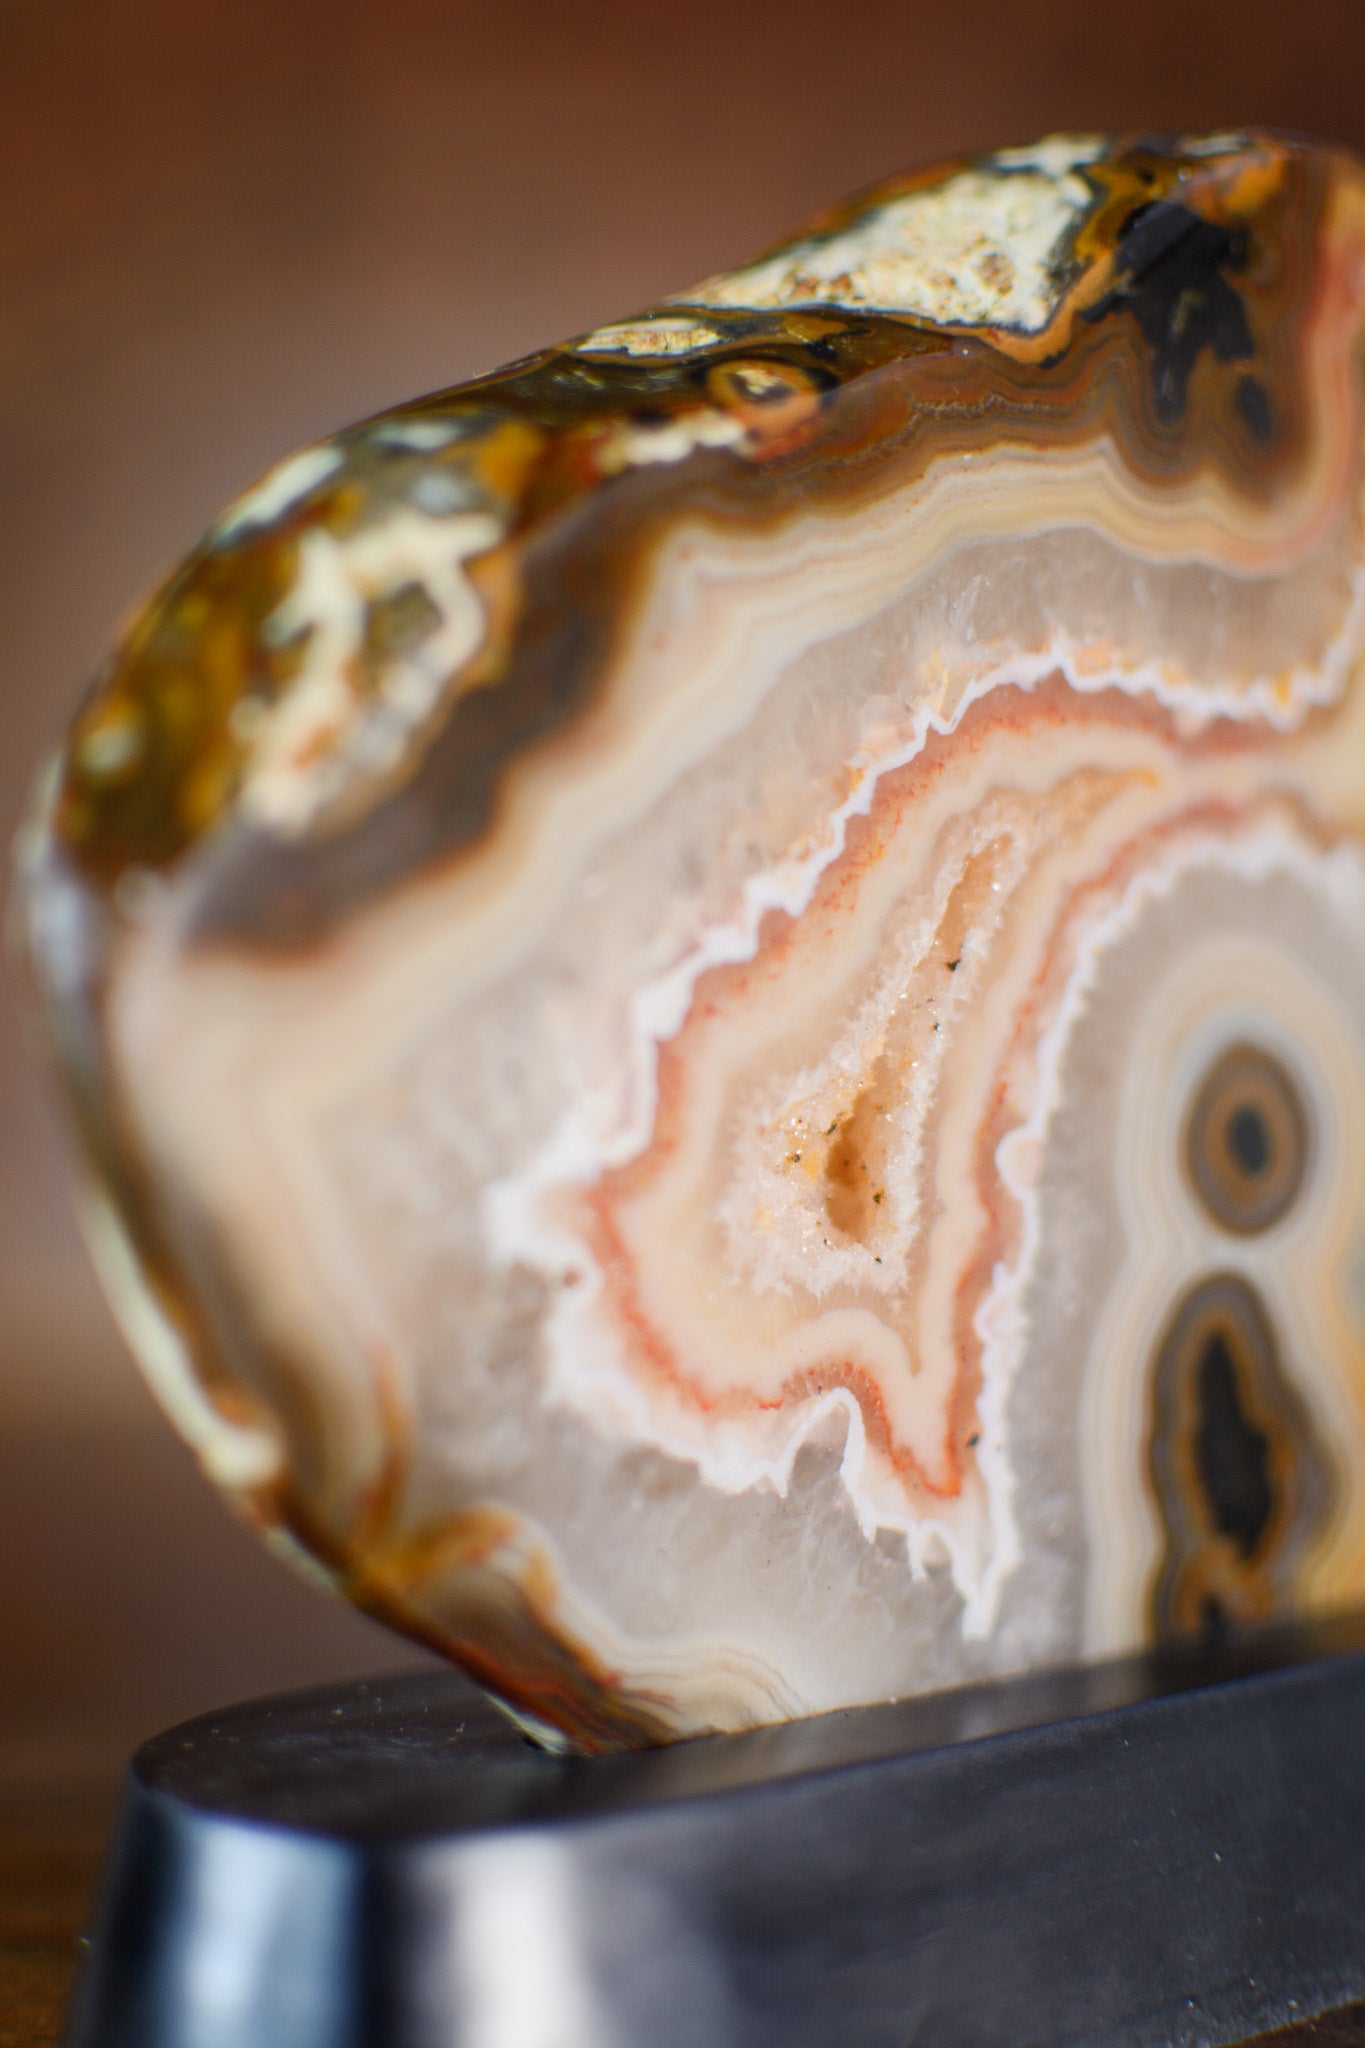 Double the Love! Heart Shaped Agate Slab on Custom Stand | Surry Hills Stones